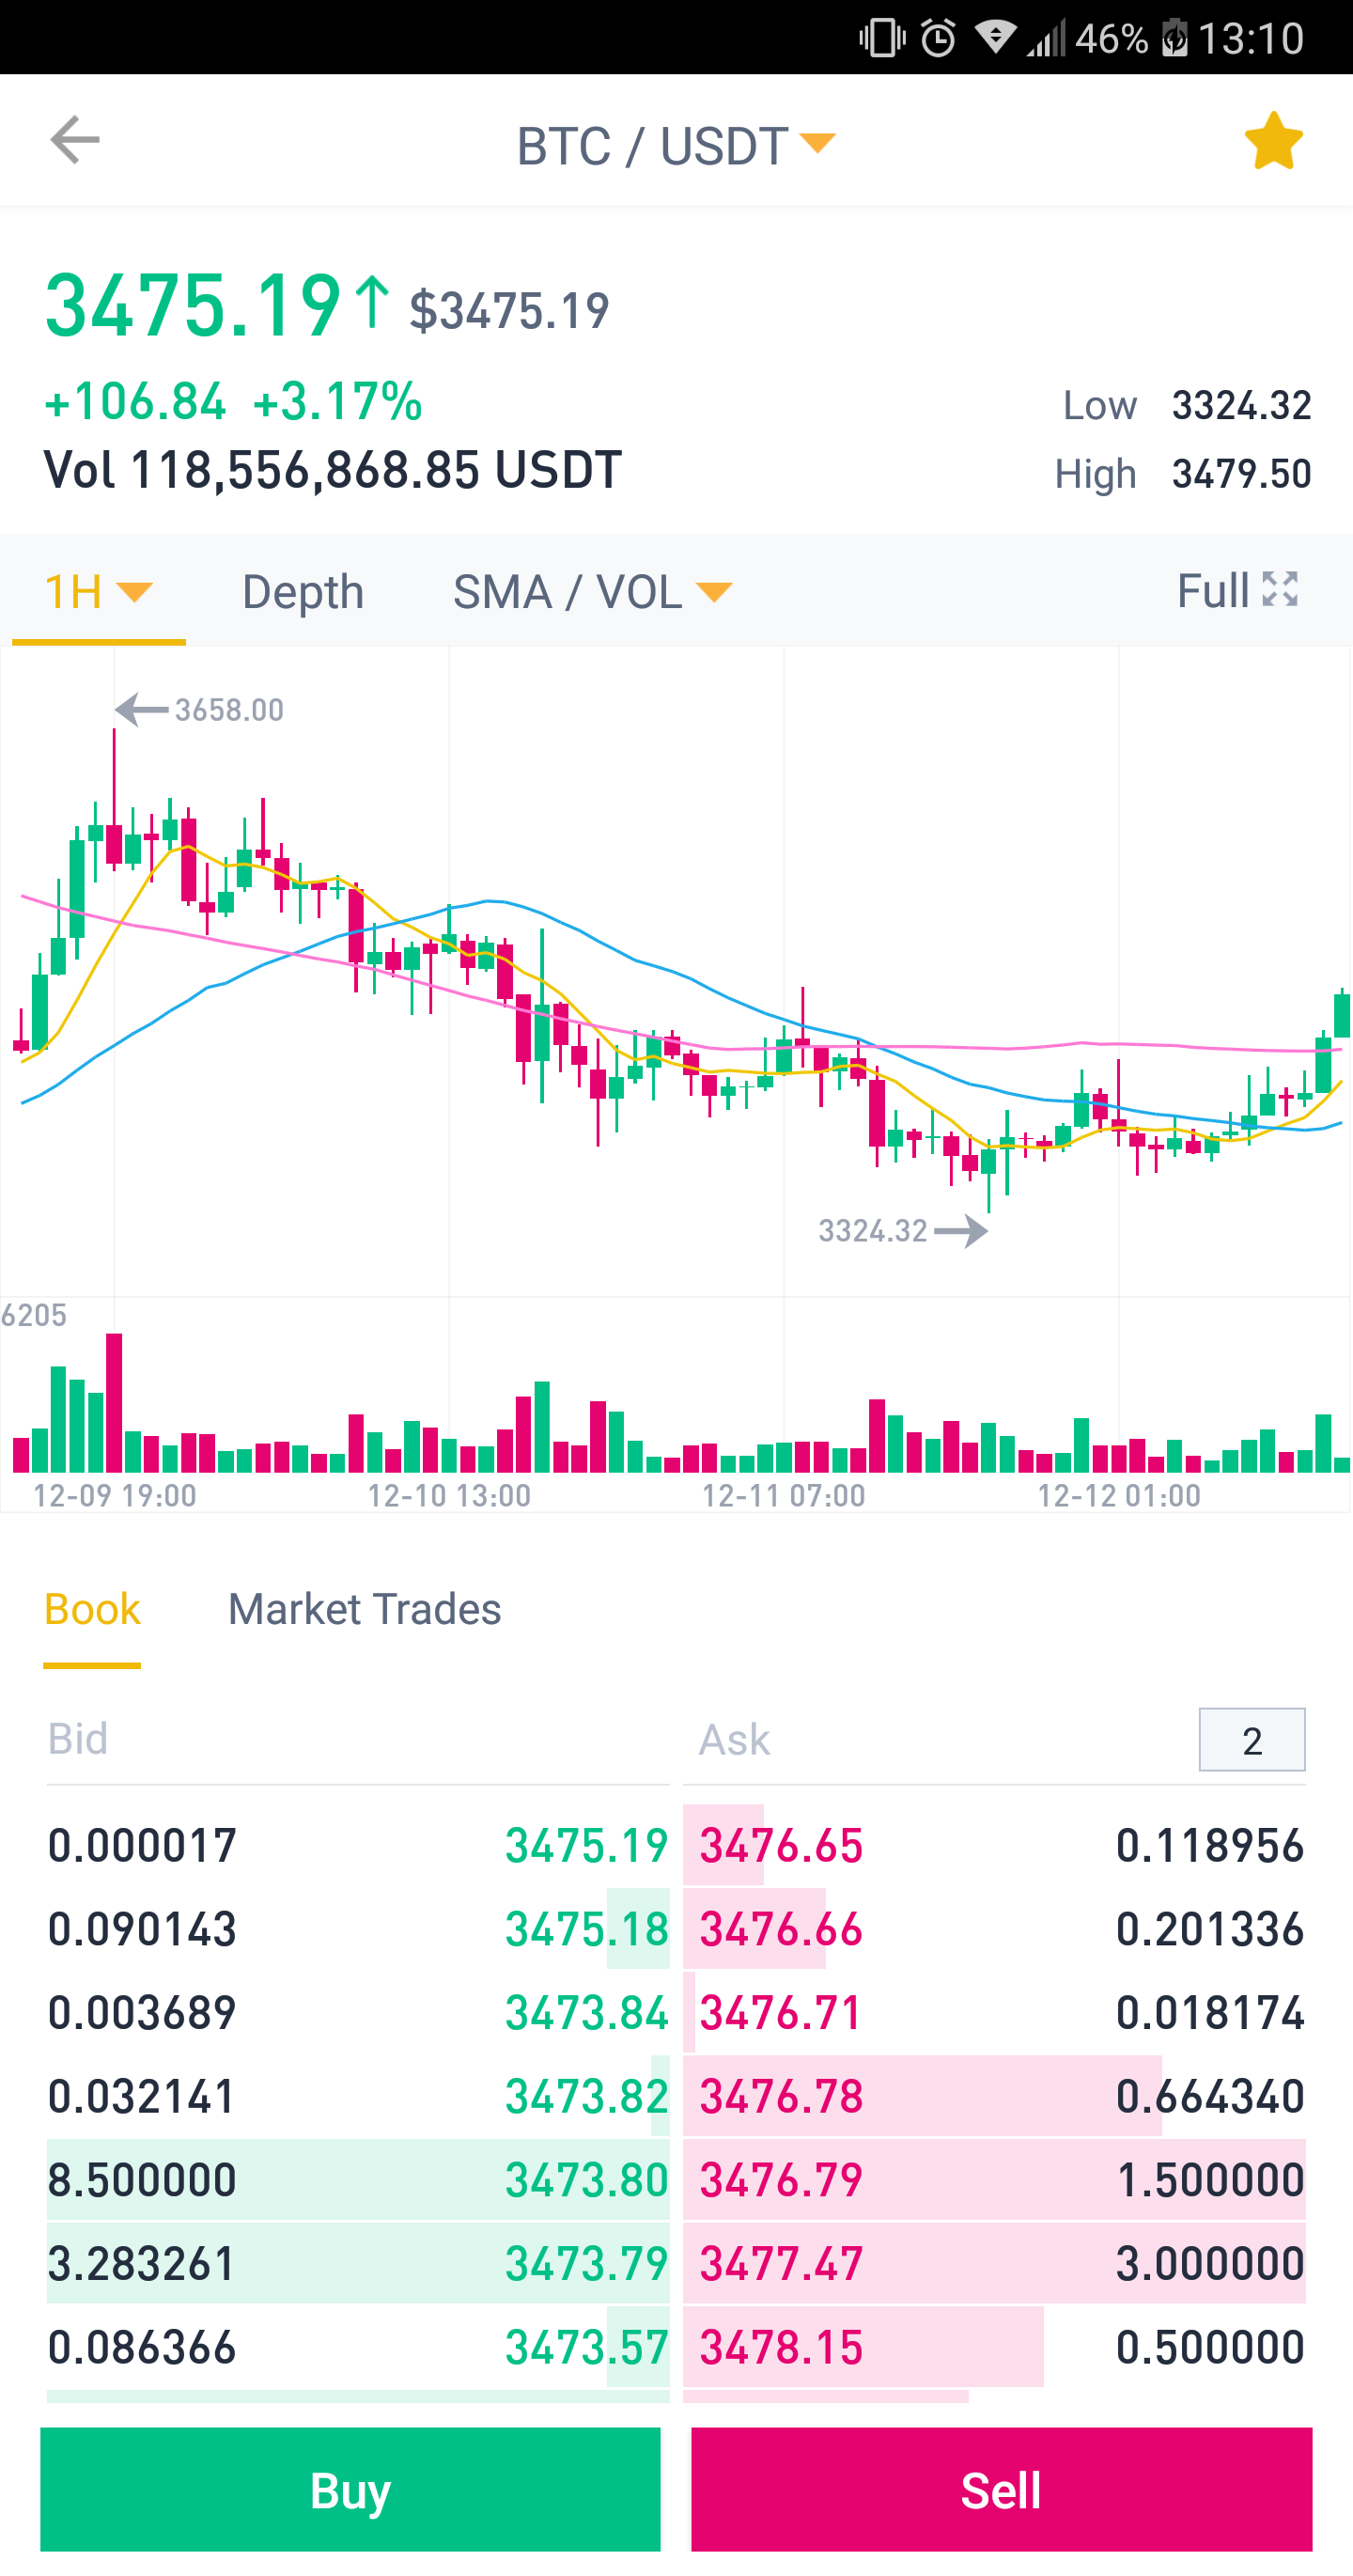  The interface of Binance’s mobile trading application 